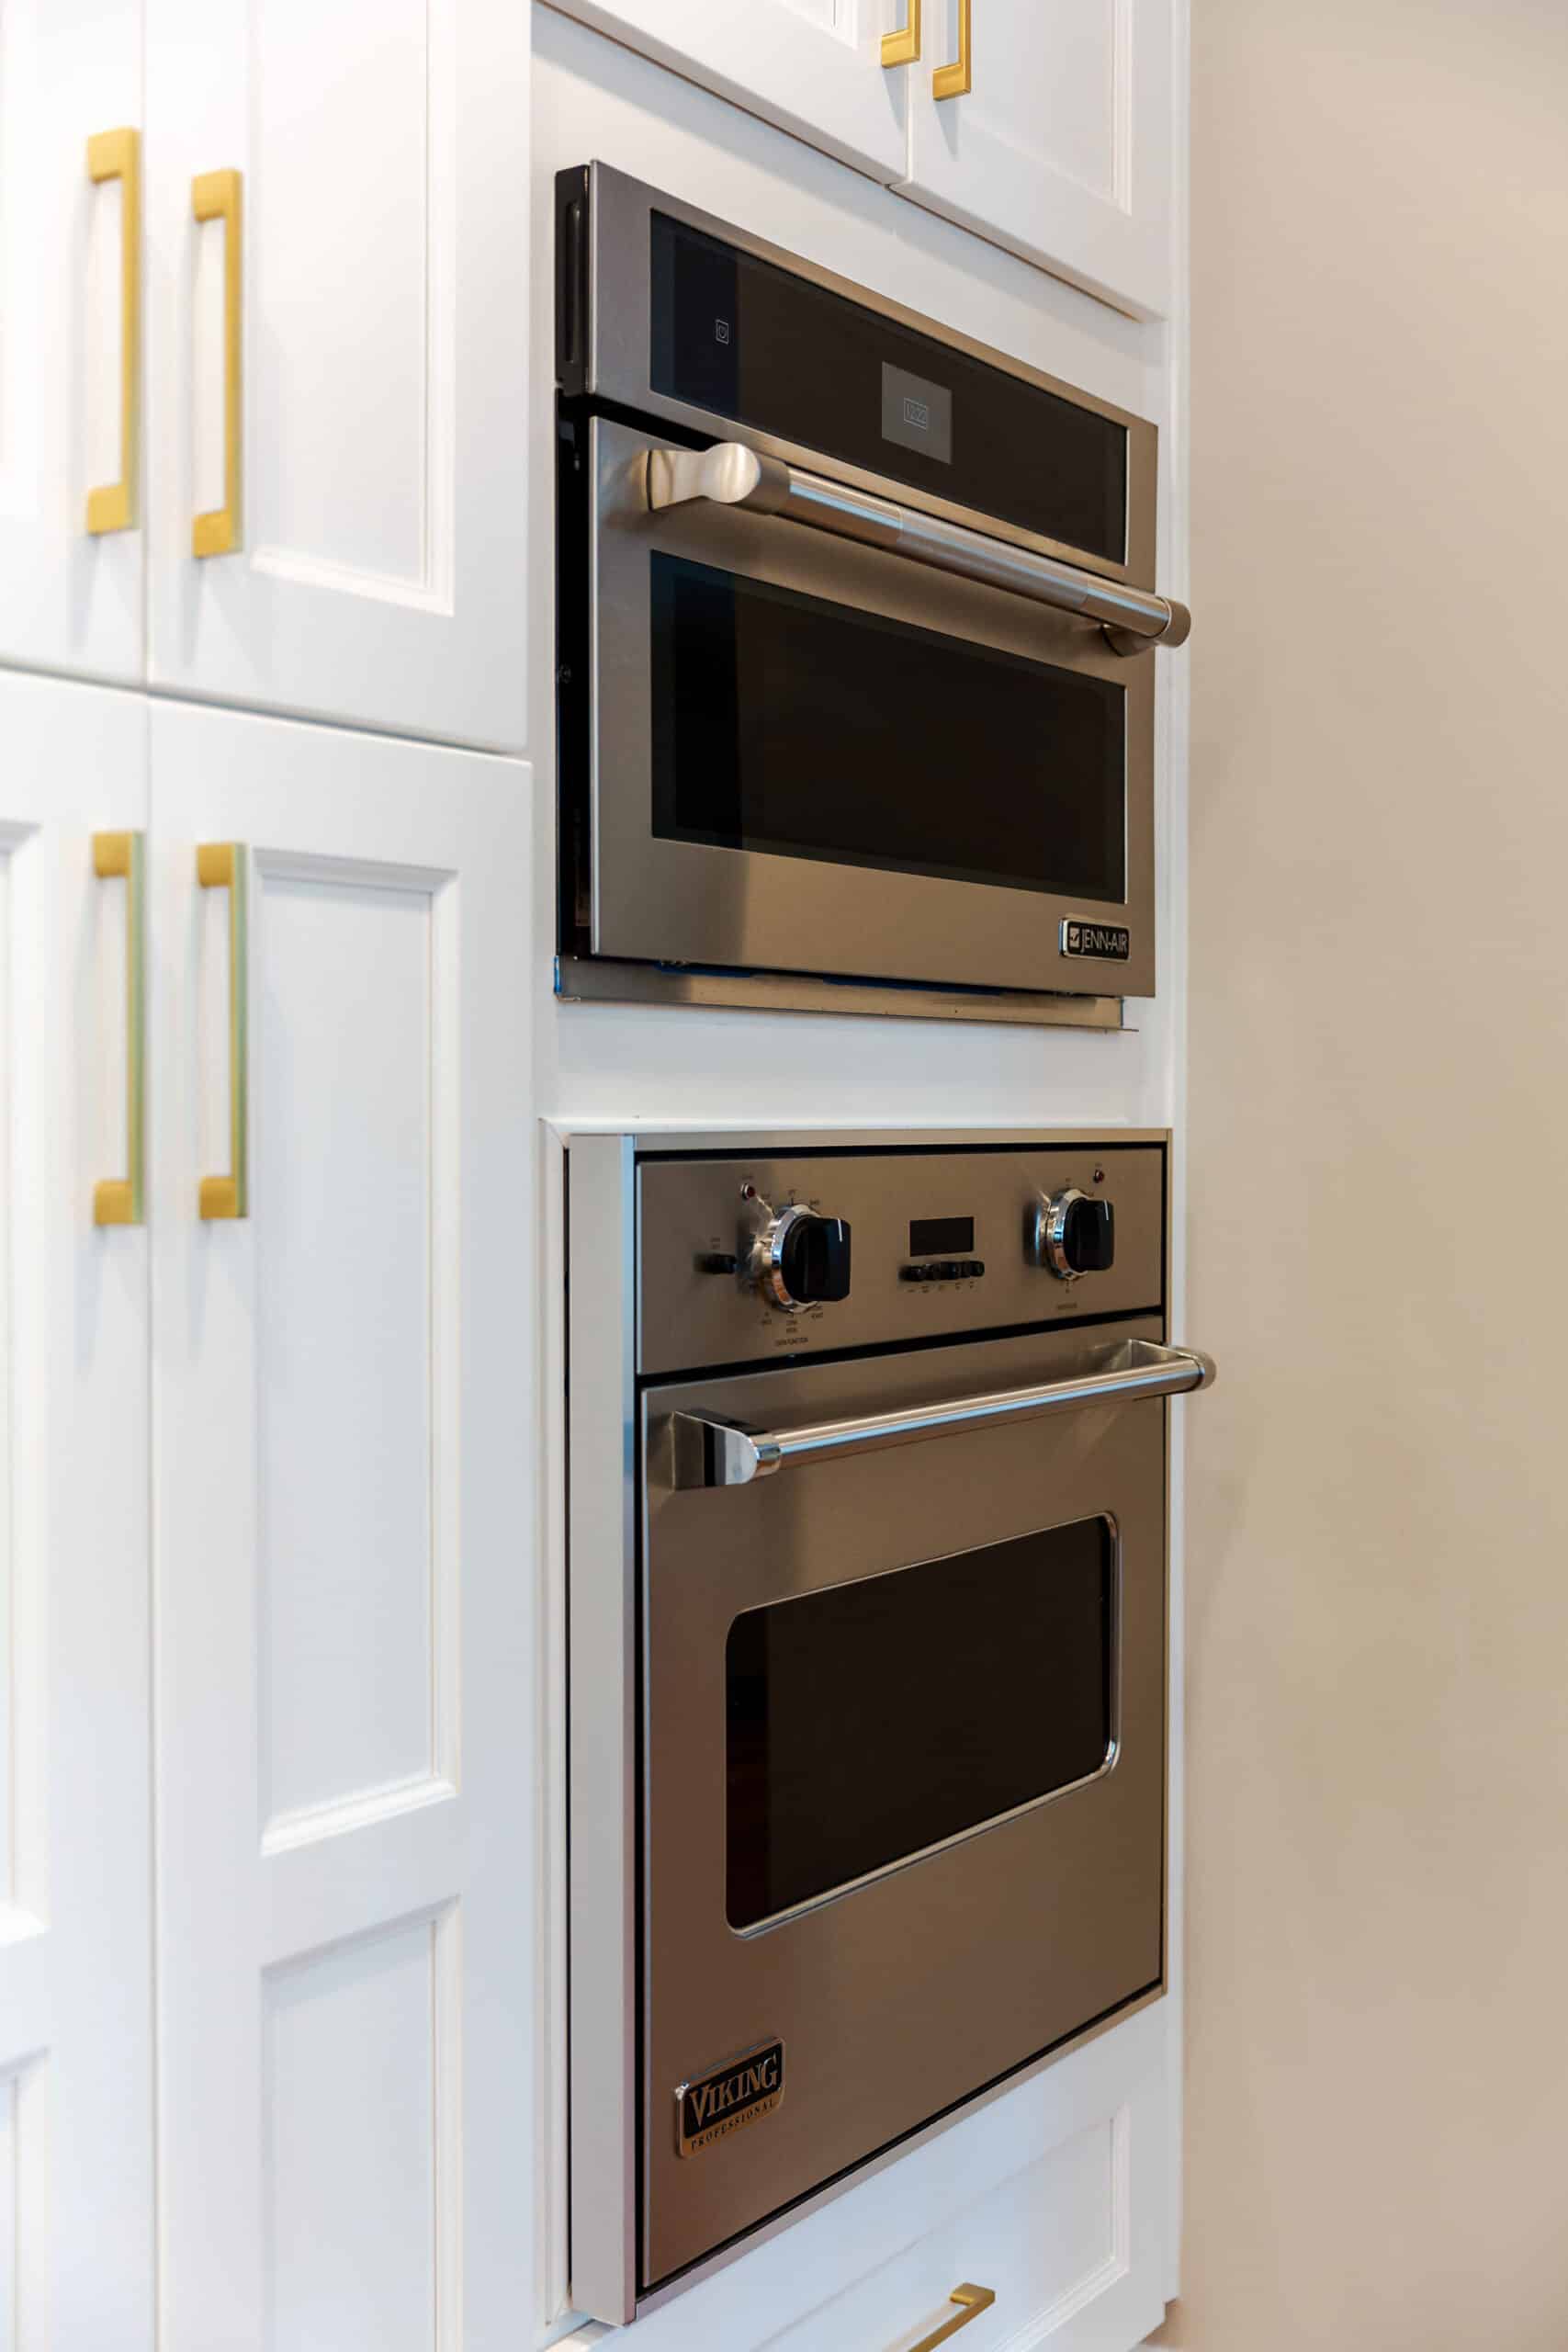 A white kitchen cabinets with two ovens